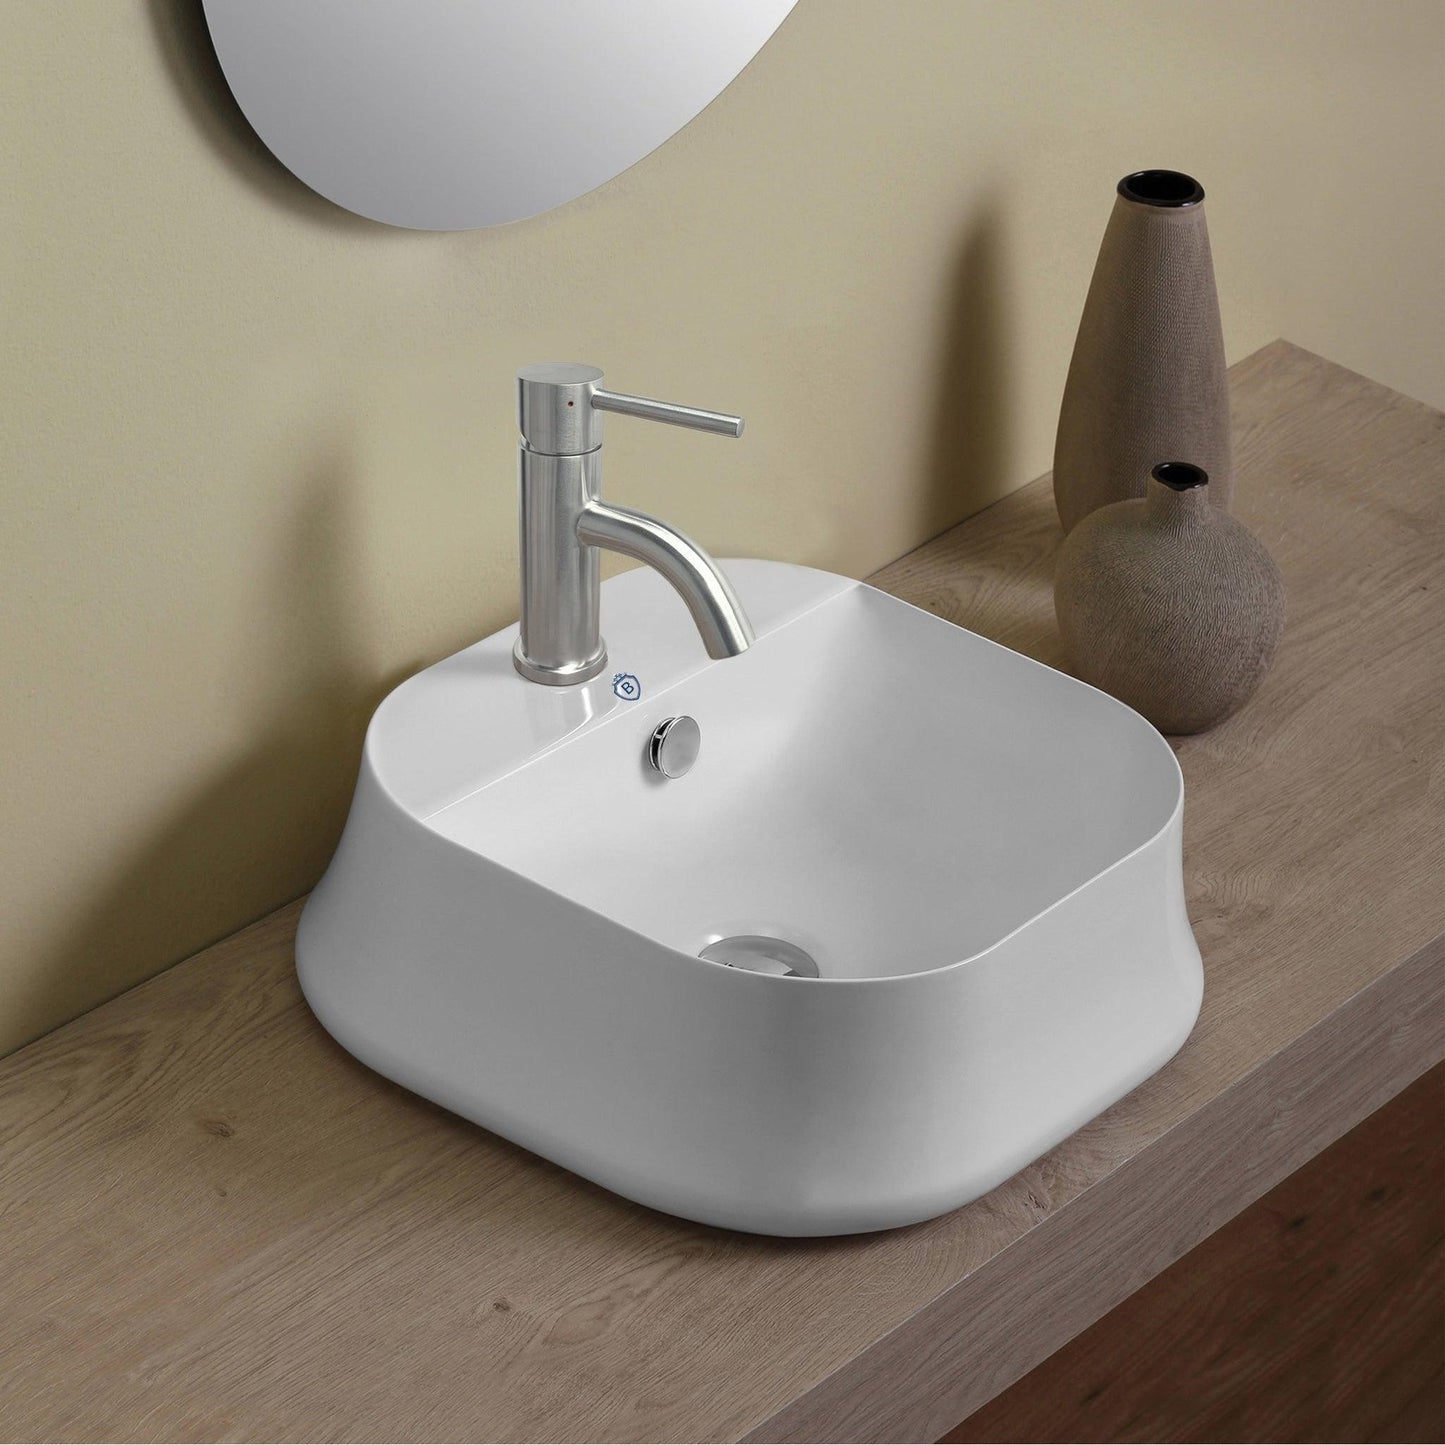 Whitehaus Britannia B-SH07 White Square Above Mount Basin With Single Faucet Hole Drill With Rear Center Drain